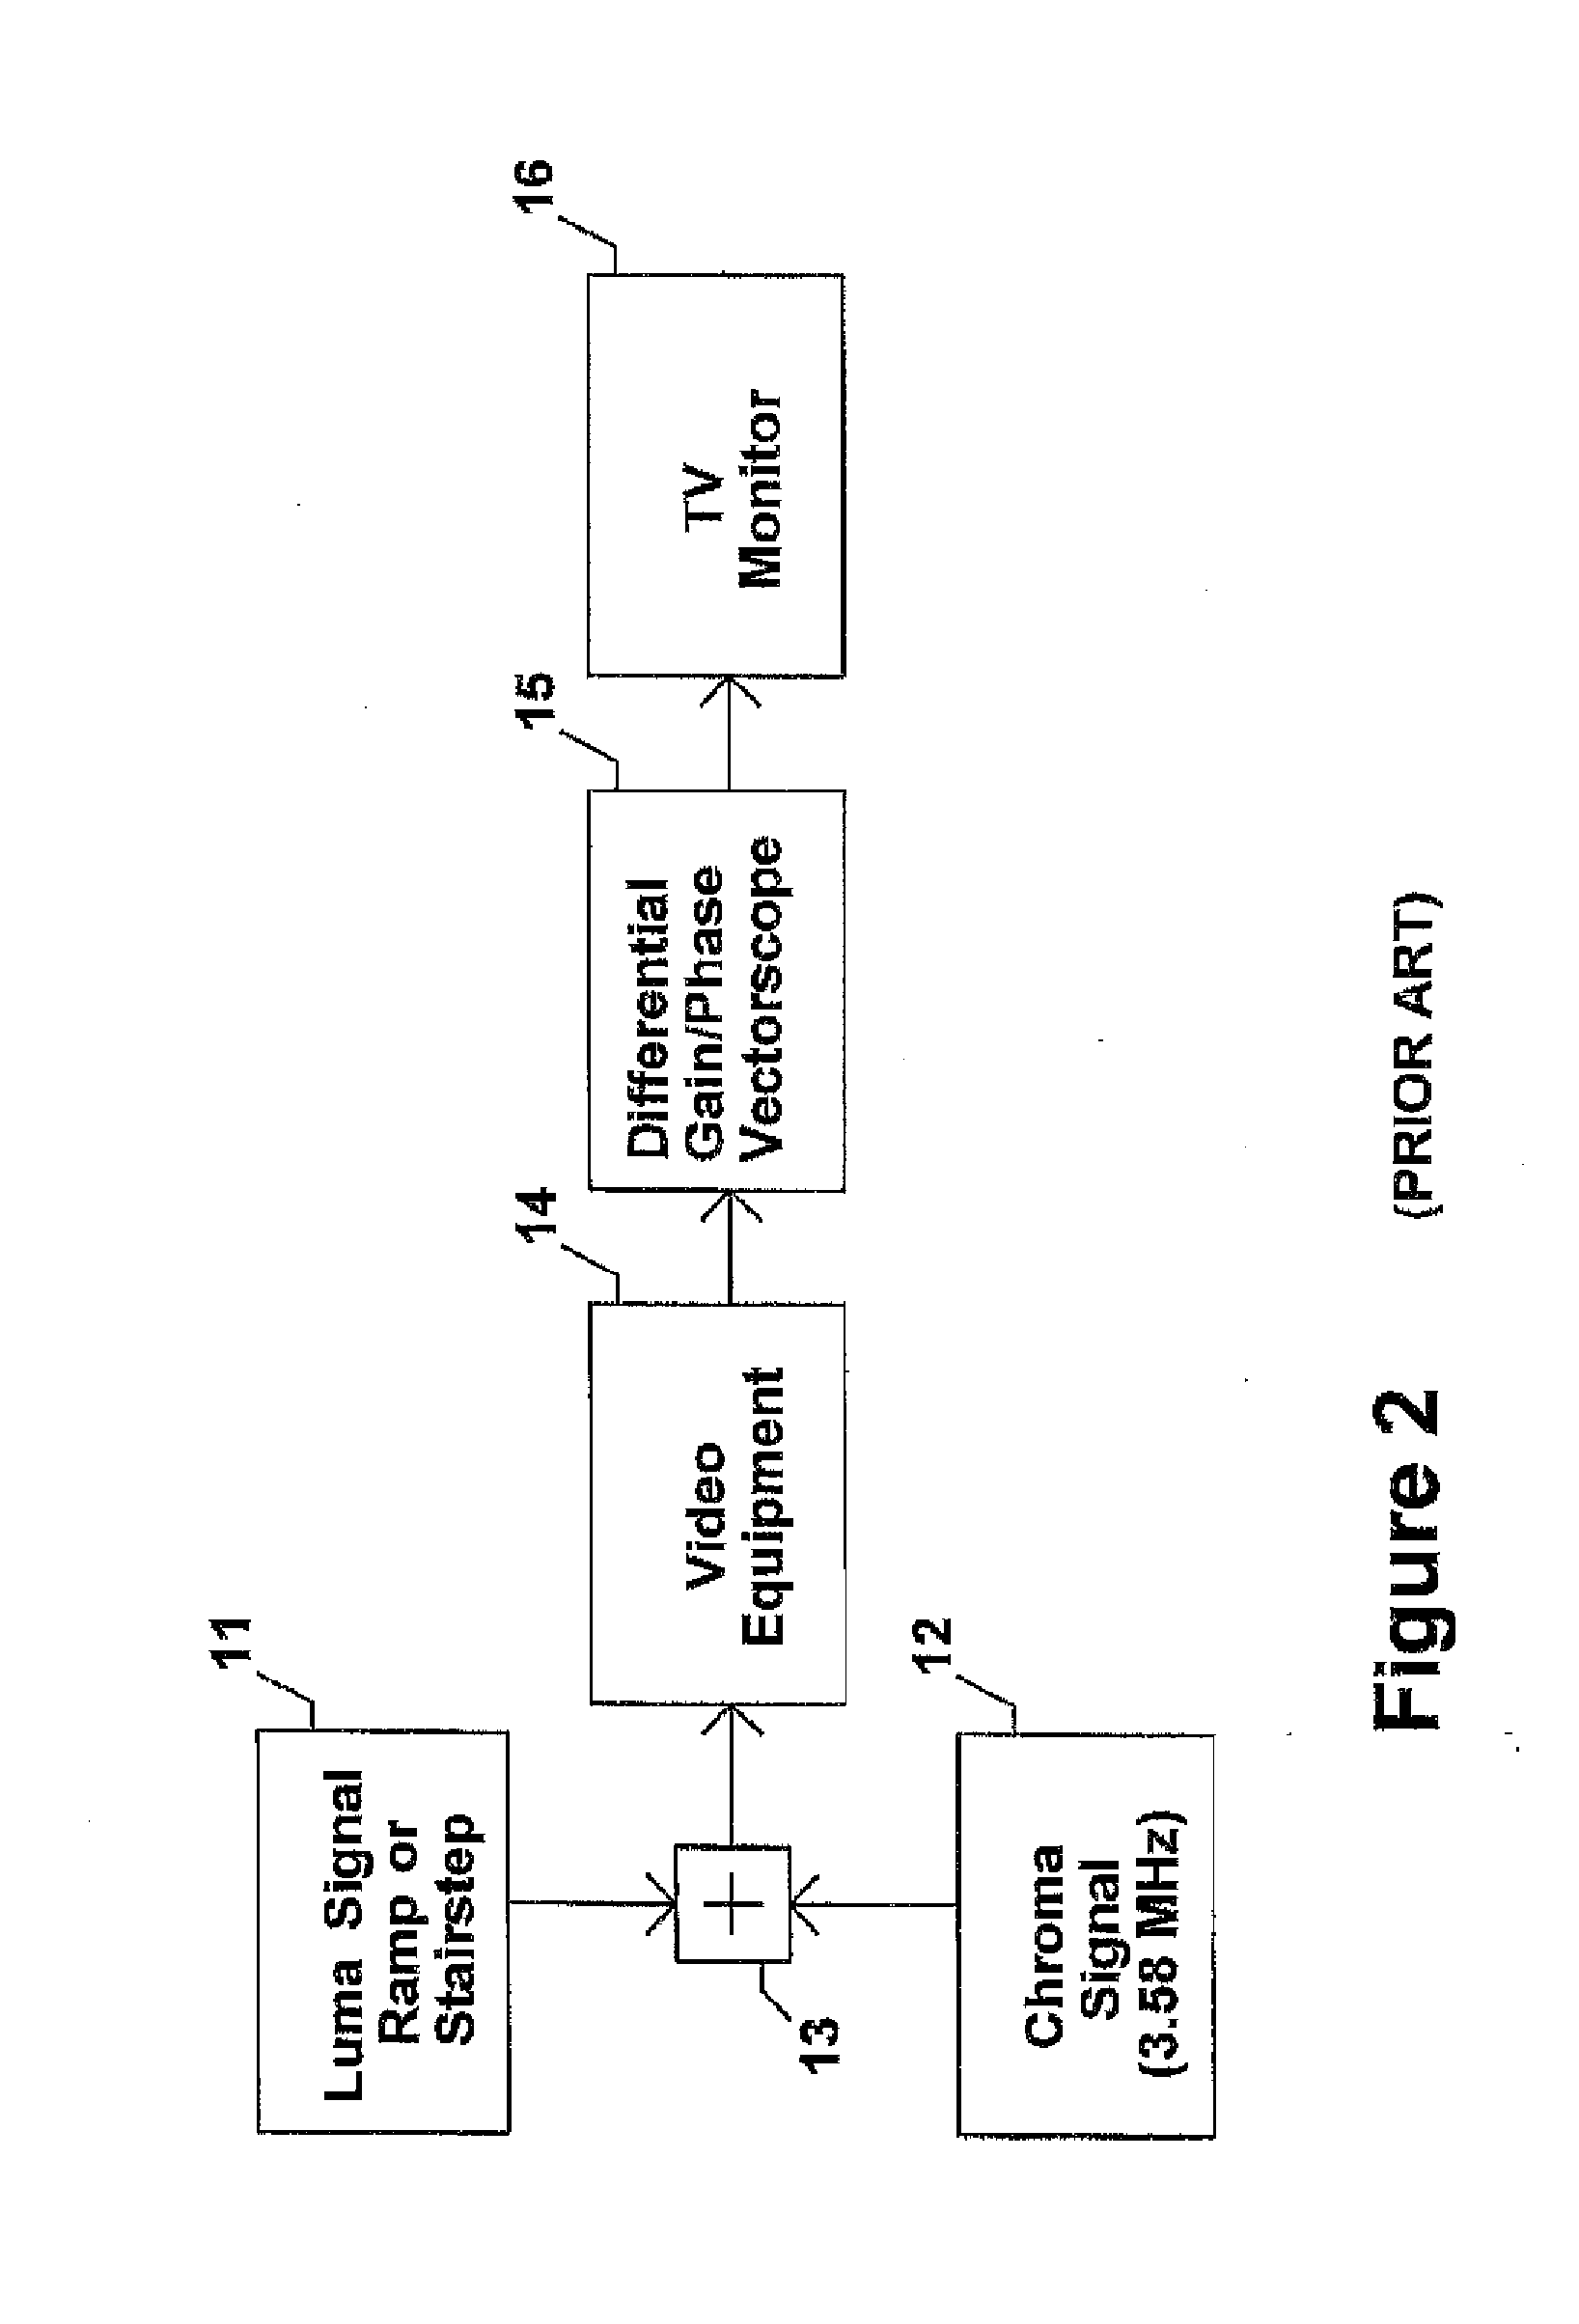 Method and apparatus to measure differntial phase and frequency modulation distortions for audio equipment